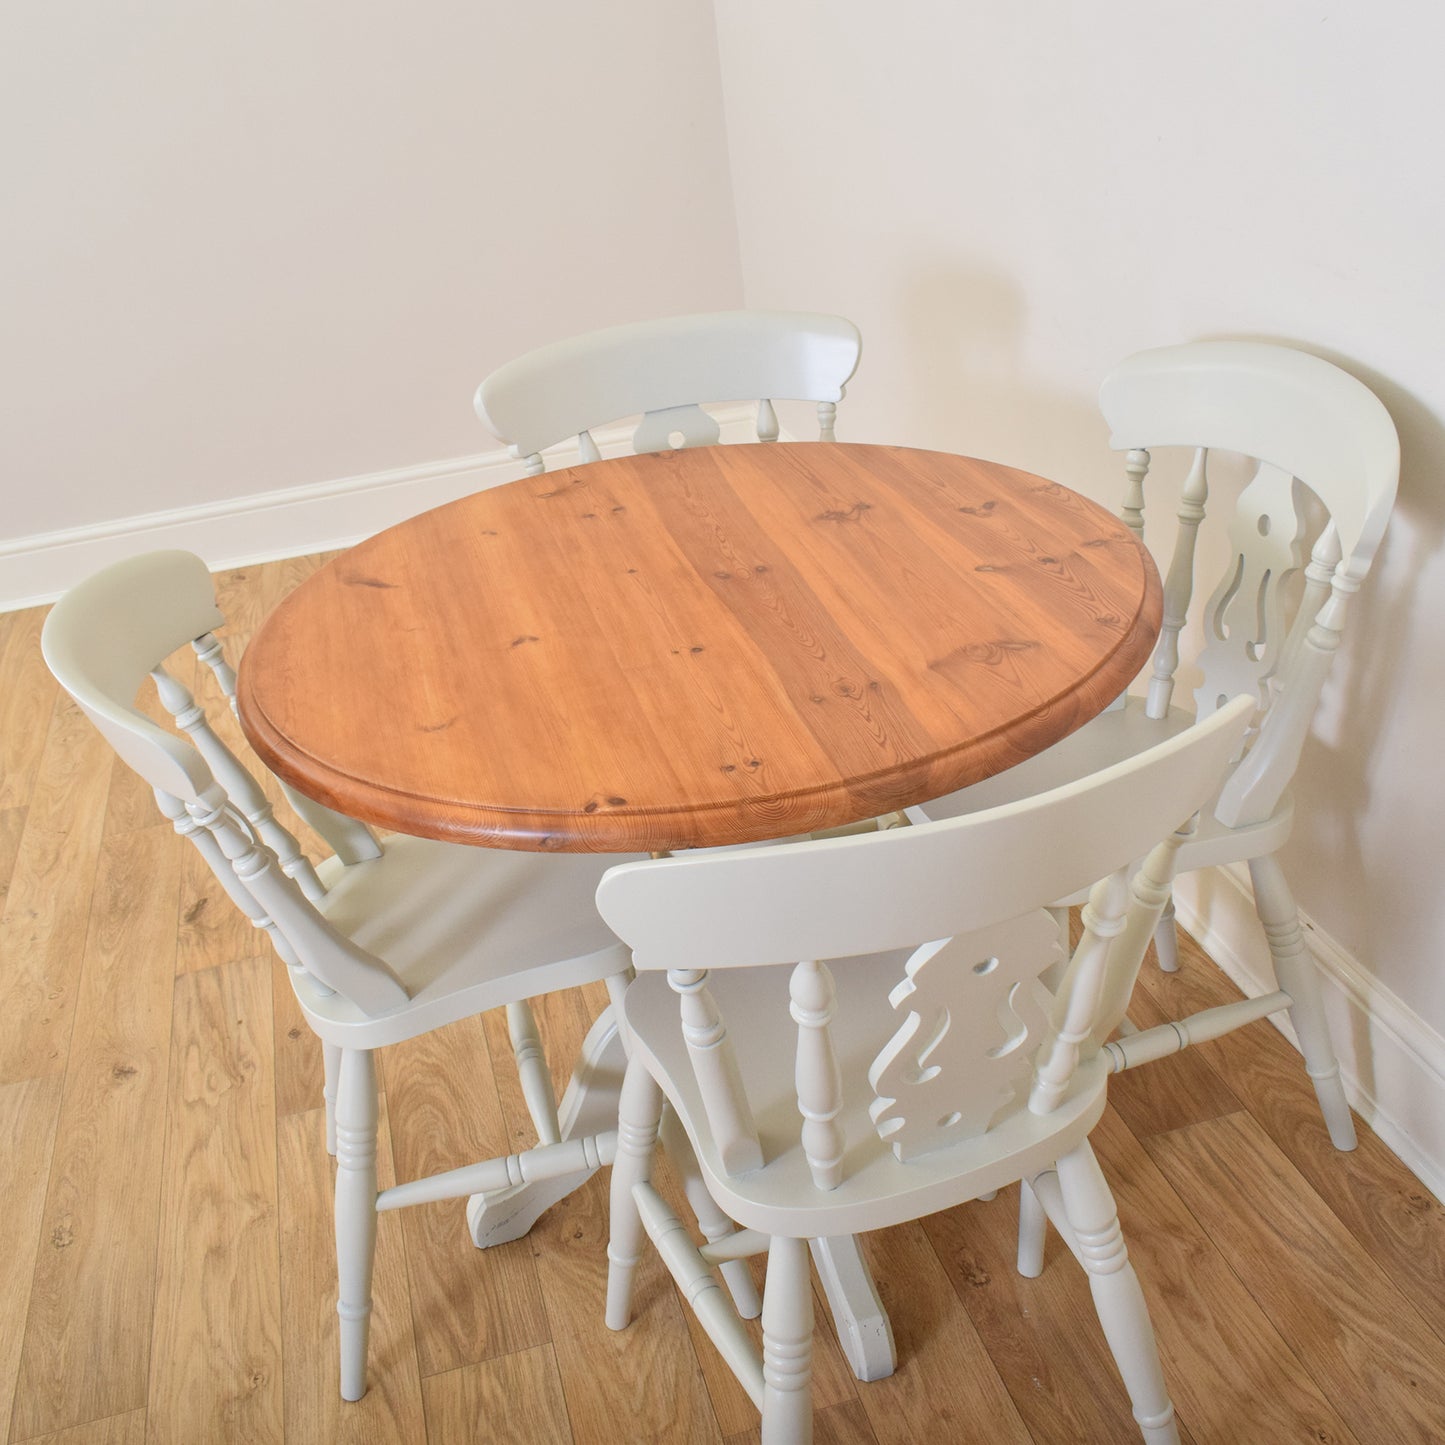 Painted Pine Table and Four Chairs